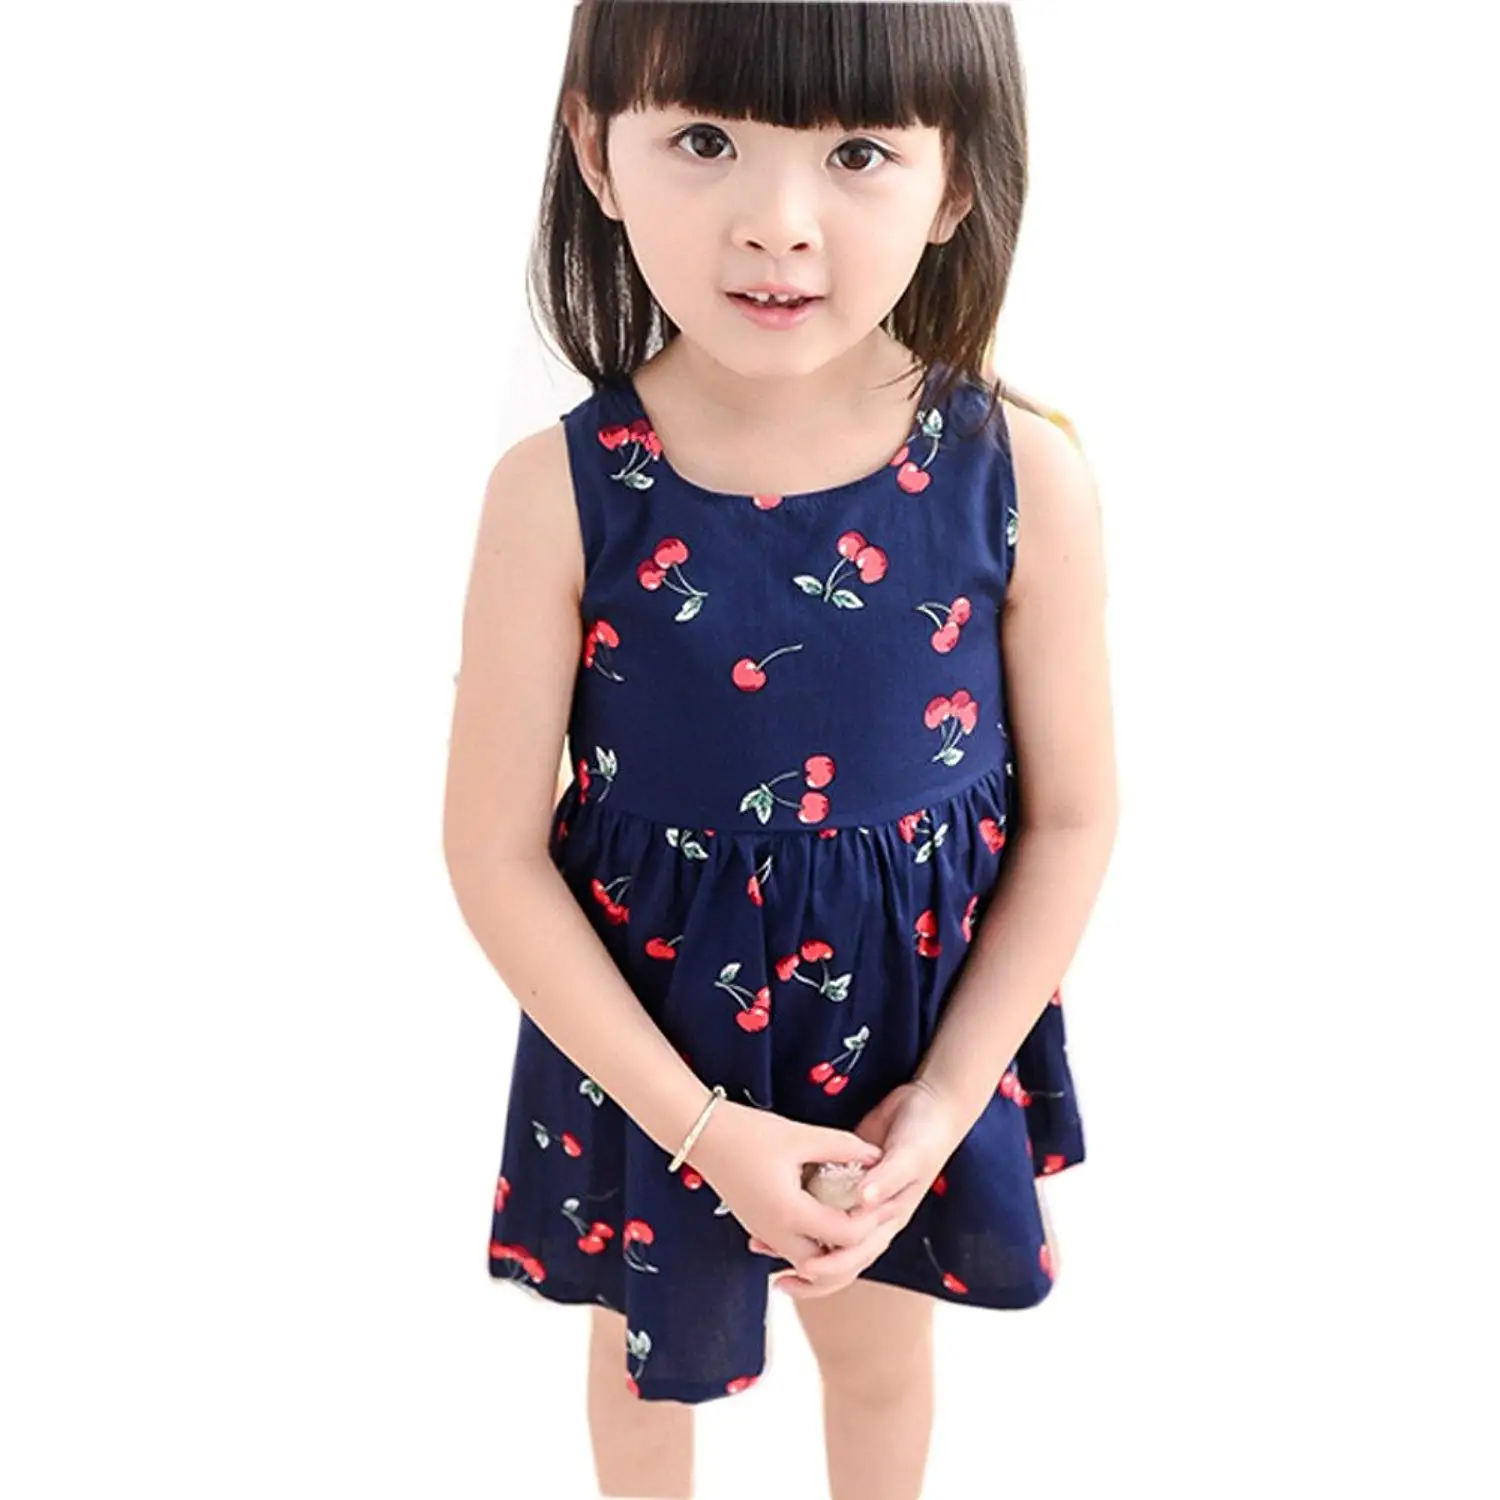 Cheap Girl Child Frocks, find Girl Child Frocks deals on line at ...